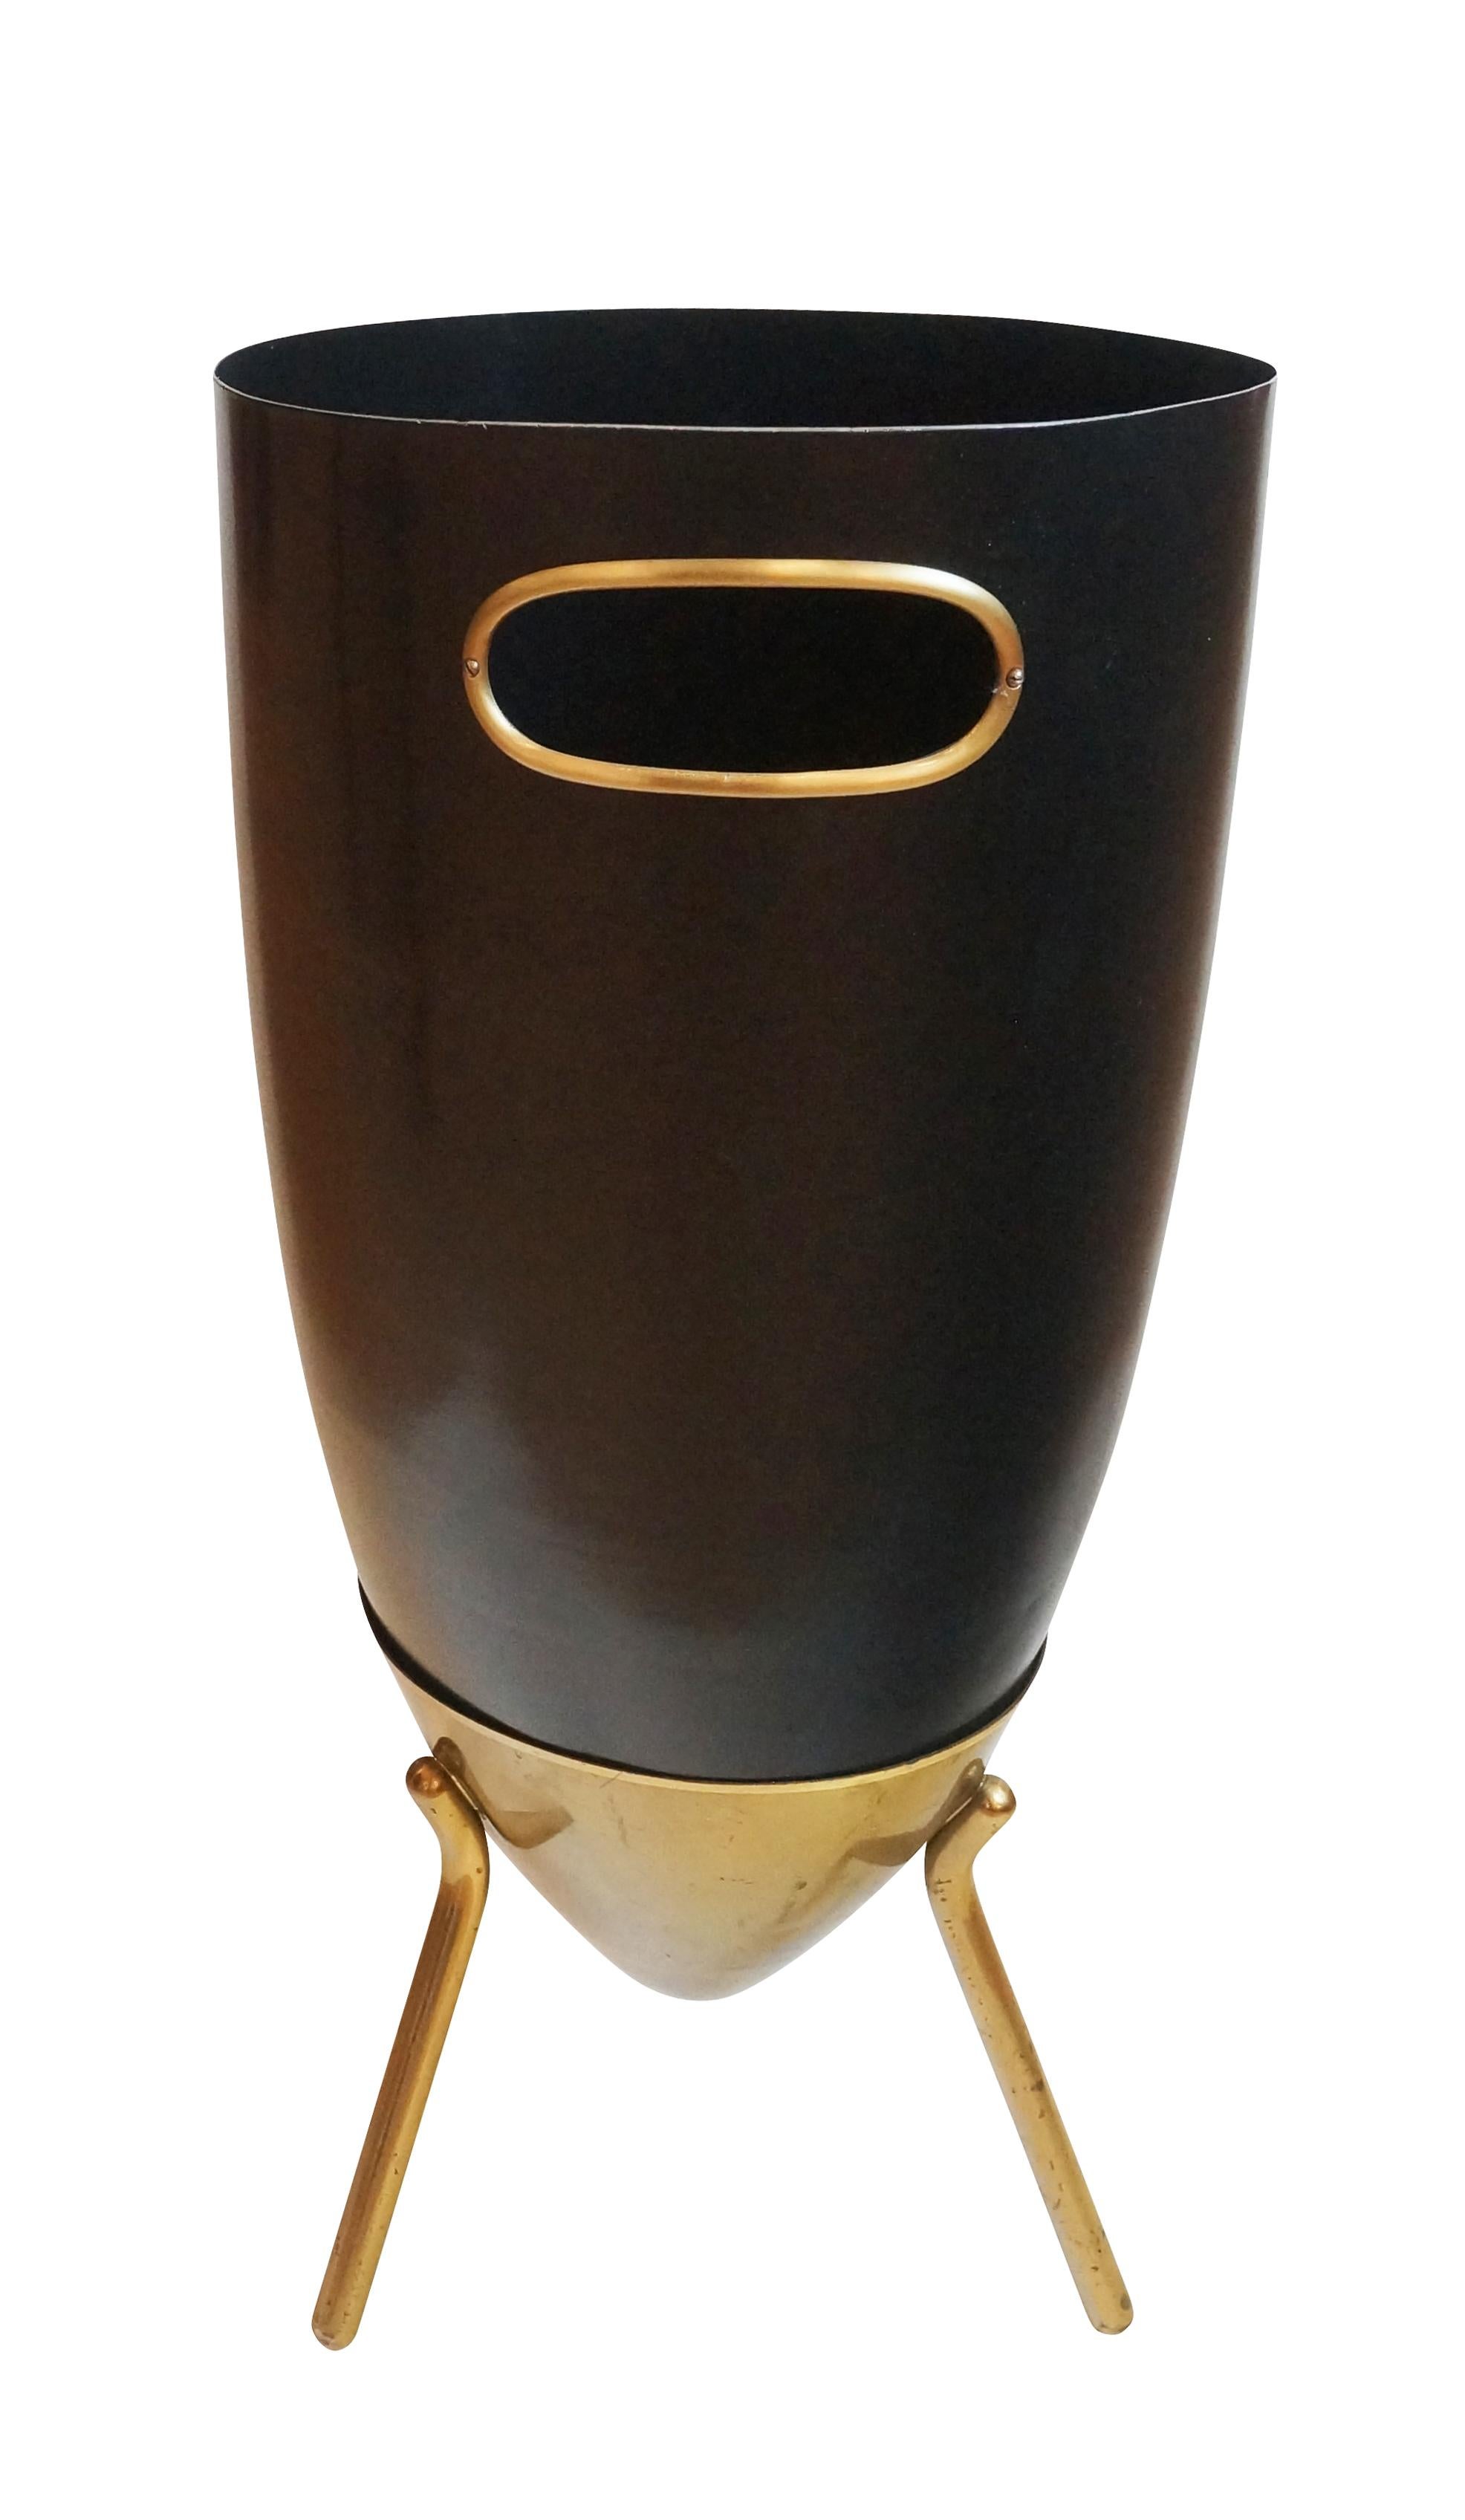 Italian Mid-Century umbrella stand with a black body and brass detailing.

Condition: Excellent vintage condition, minor wear consistent with age and use. 

Diameter: 10”

Height: 21.5”